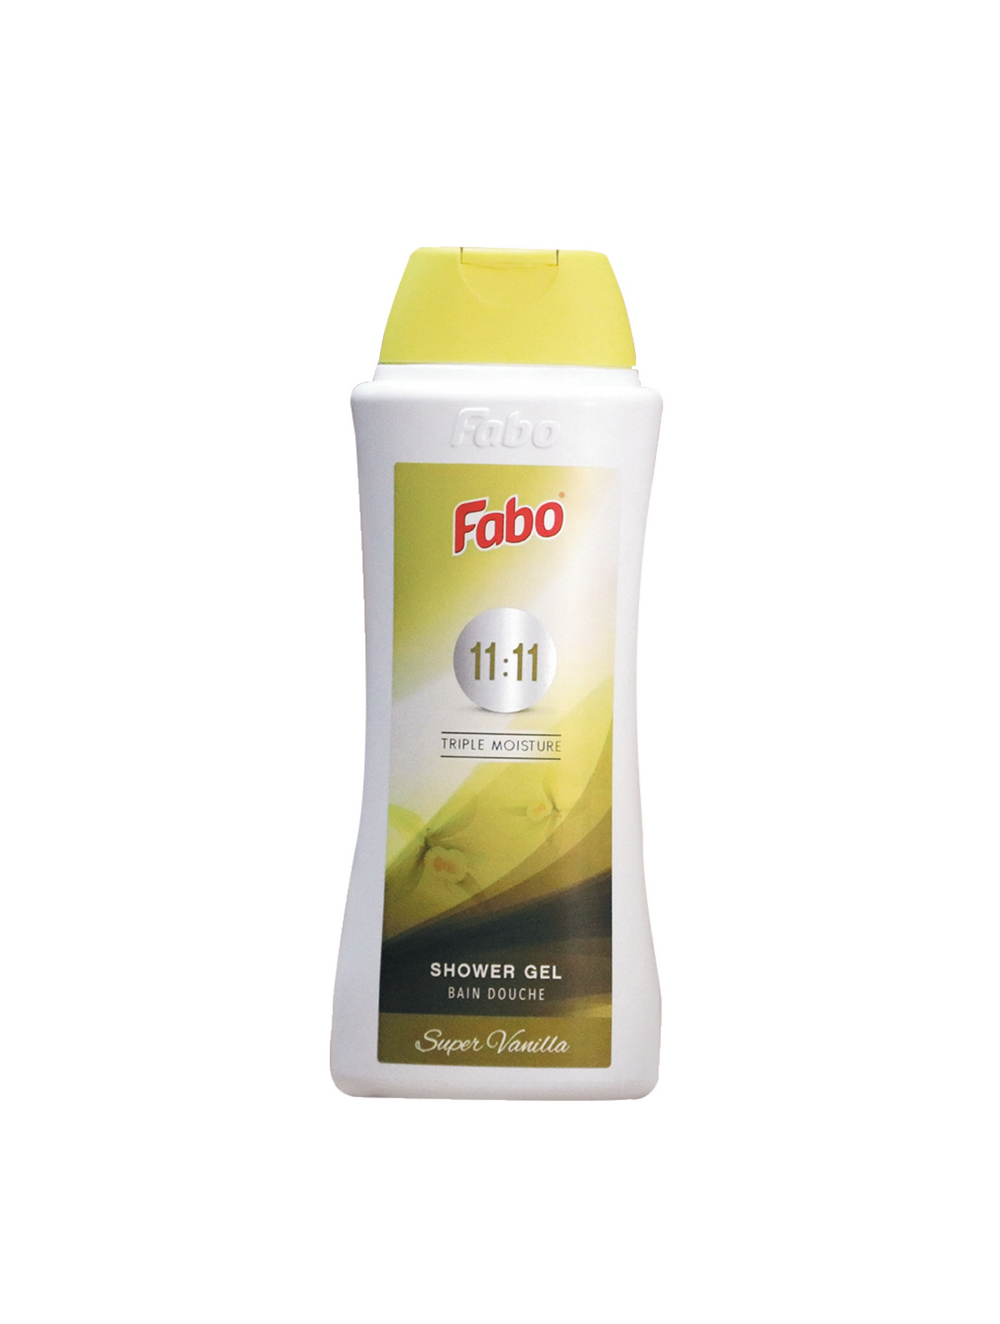 fabo-products_page-0108